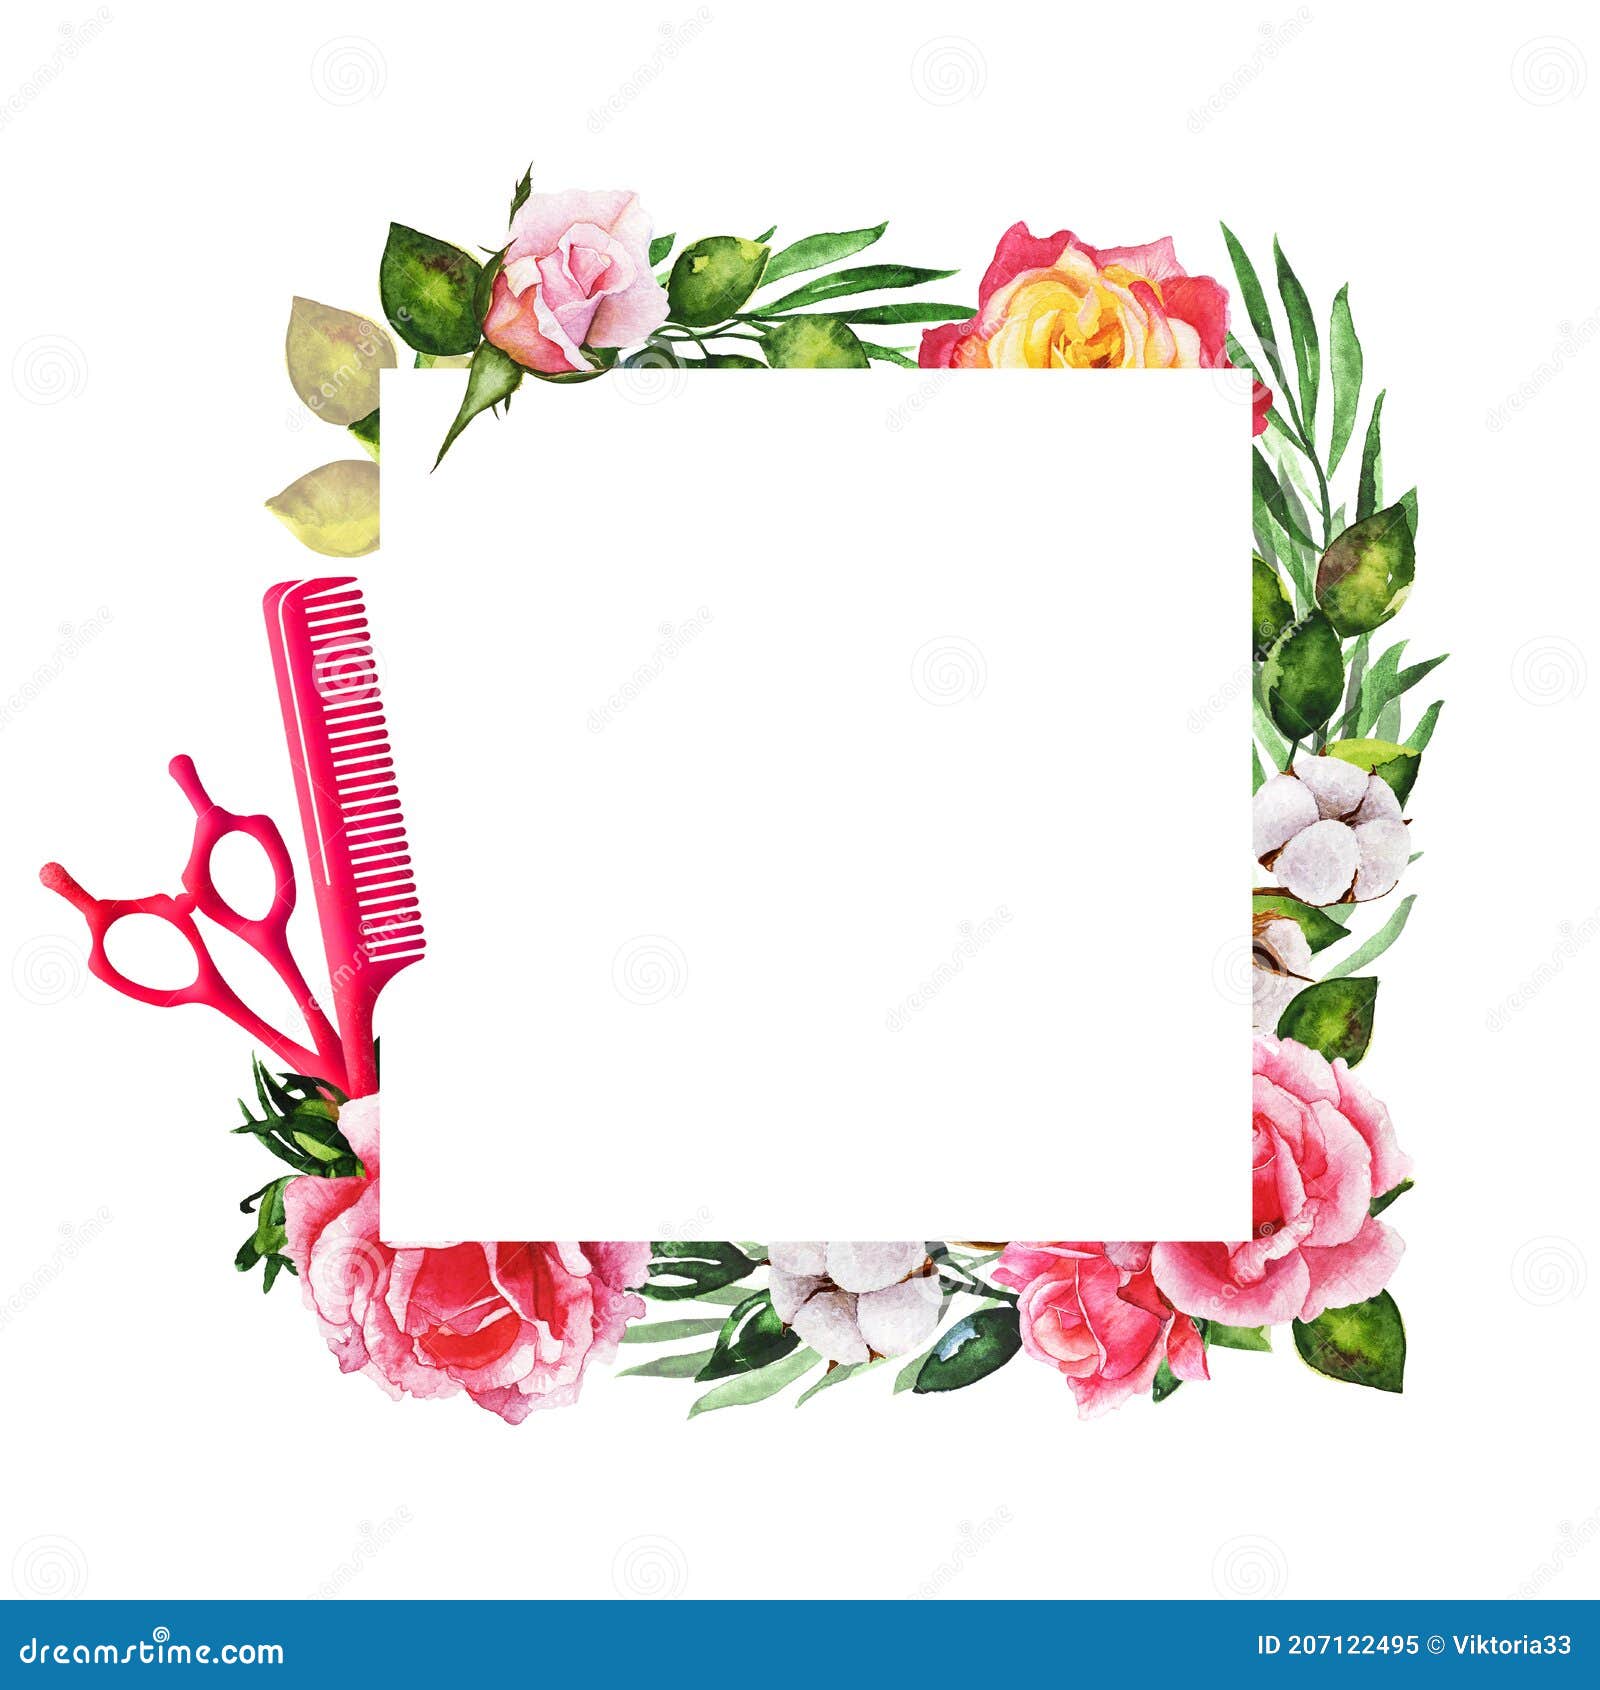 Wreaths, Floral Frames, Watercolor Flowers Roses Illustration with ...